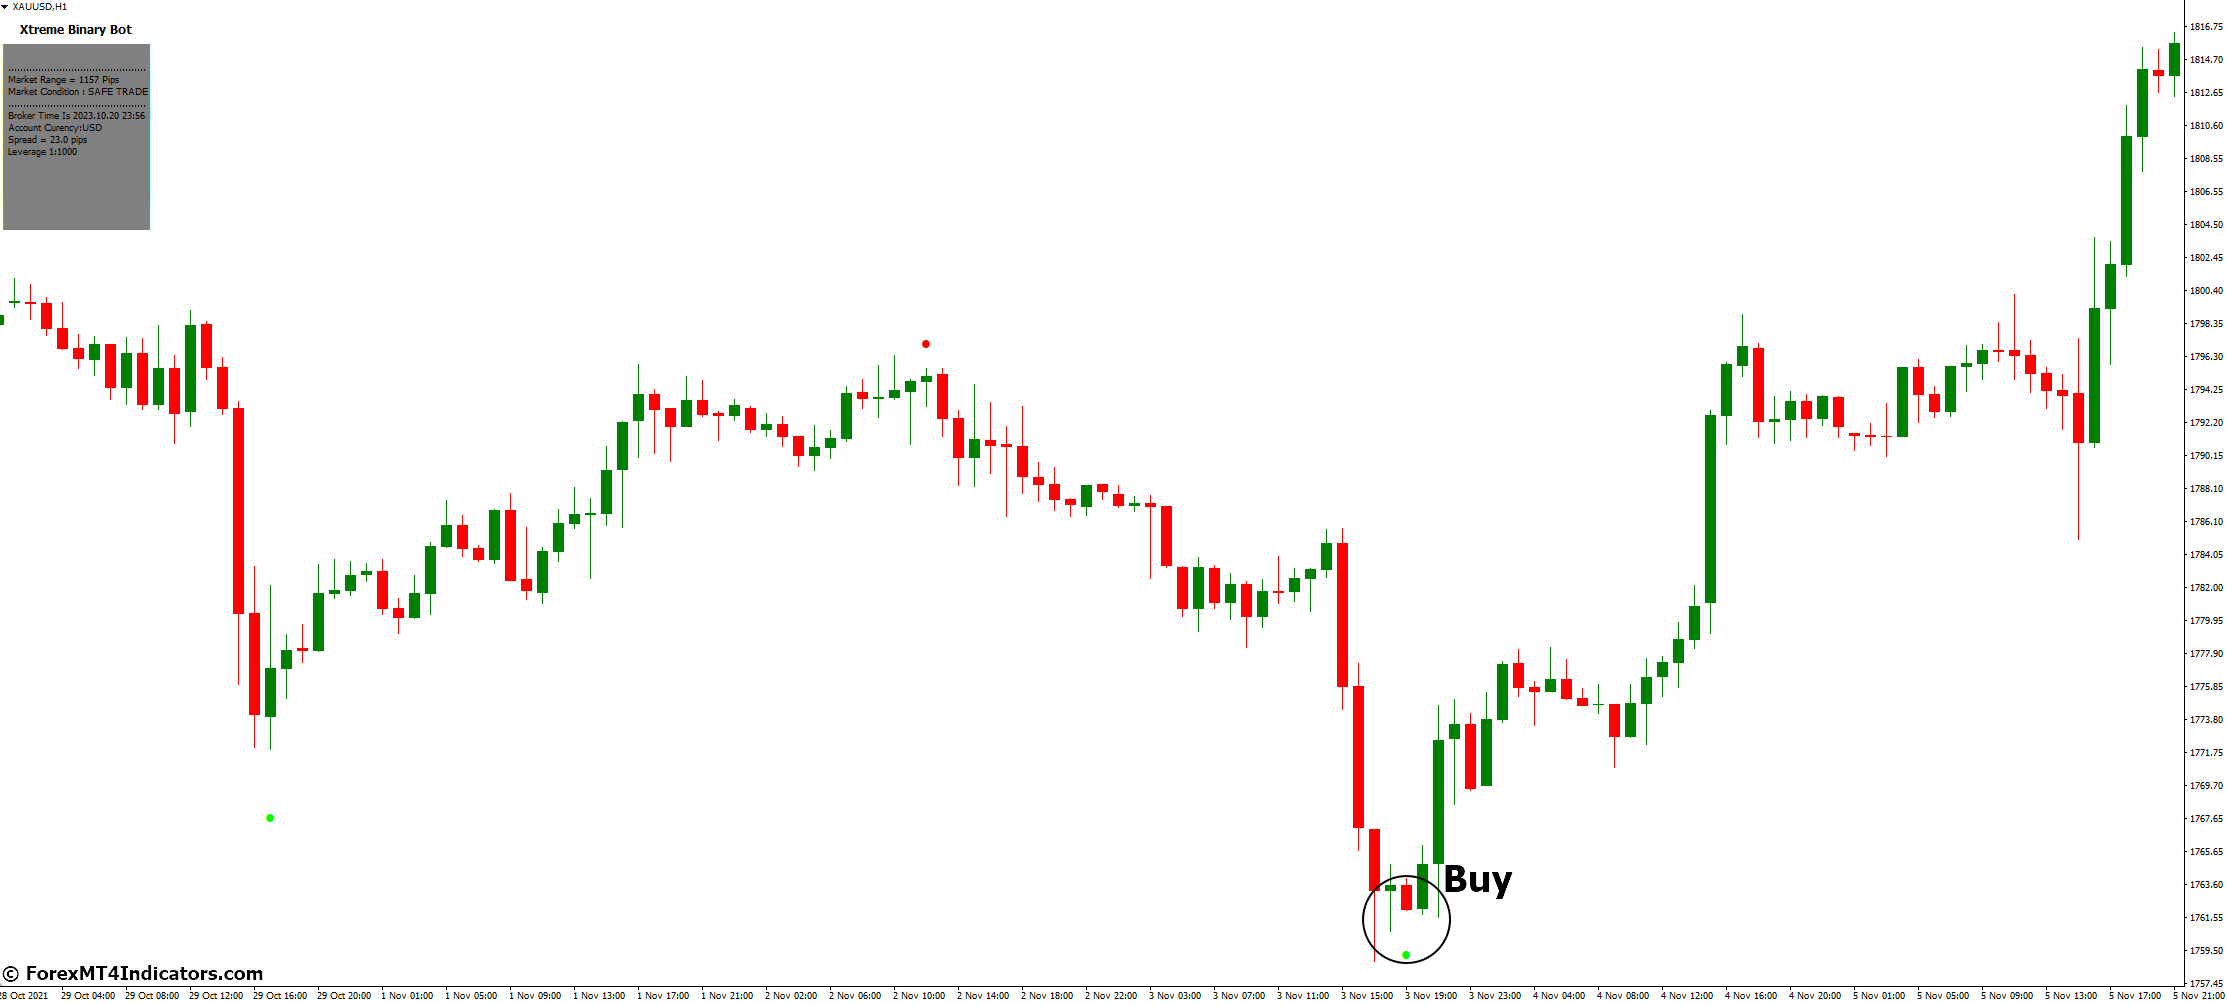 How to Trade with Xtreme Binary Bot MT4 Indicator - Buy Entry